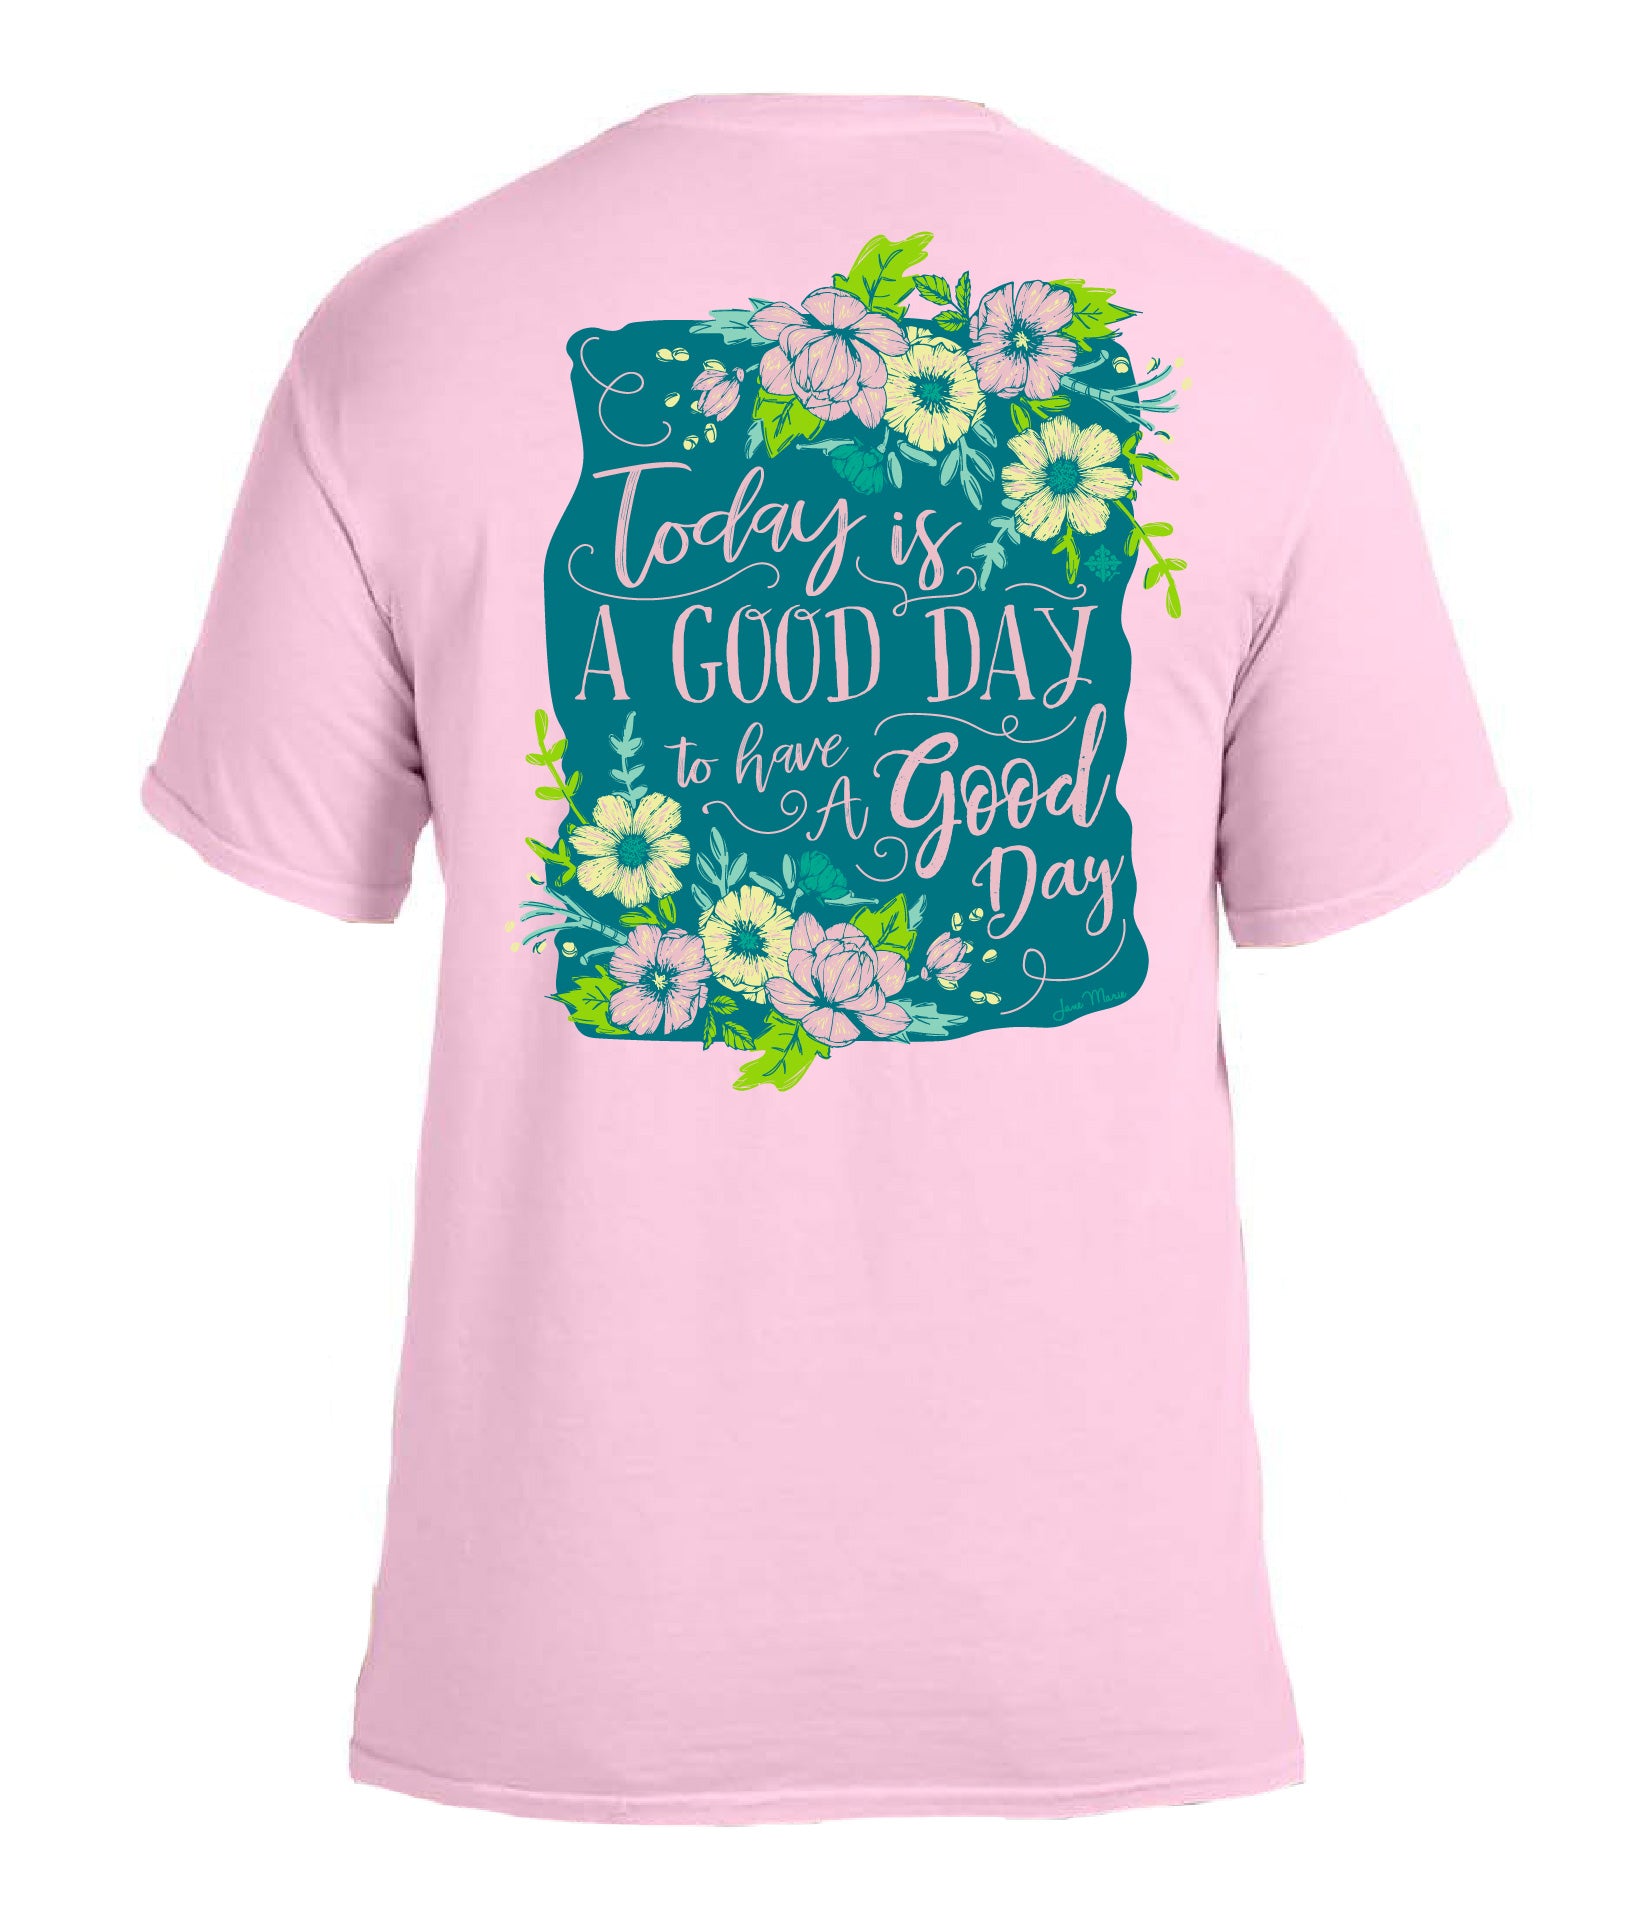 Today Is A Good Day For A Good Day-XL